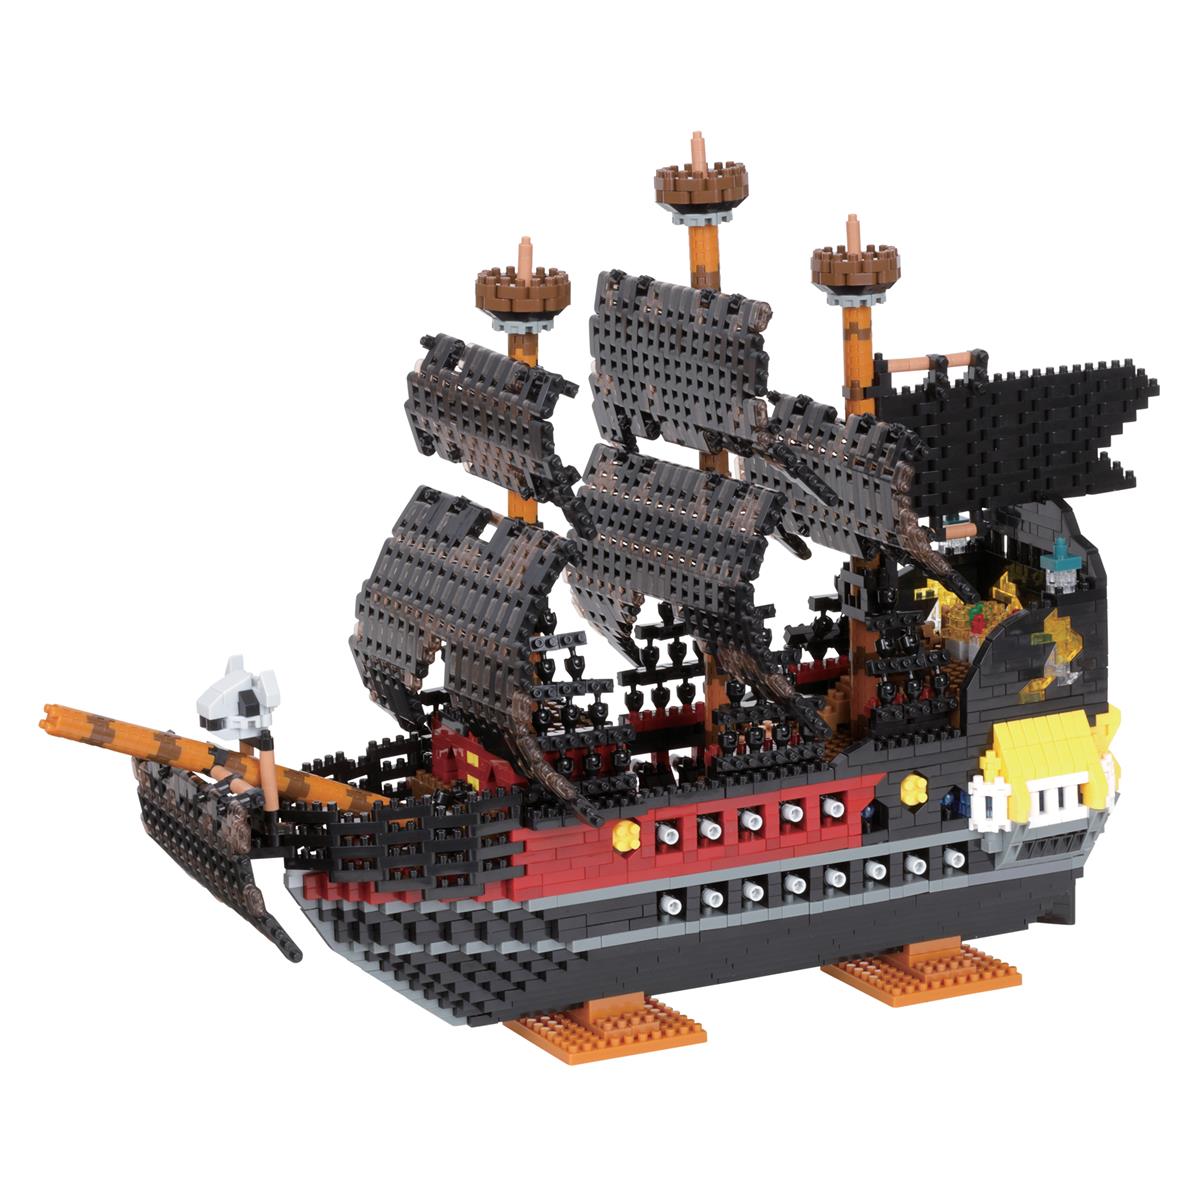 NB-050 - Pirate Ship Deluxe Edition